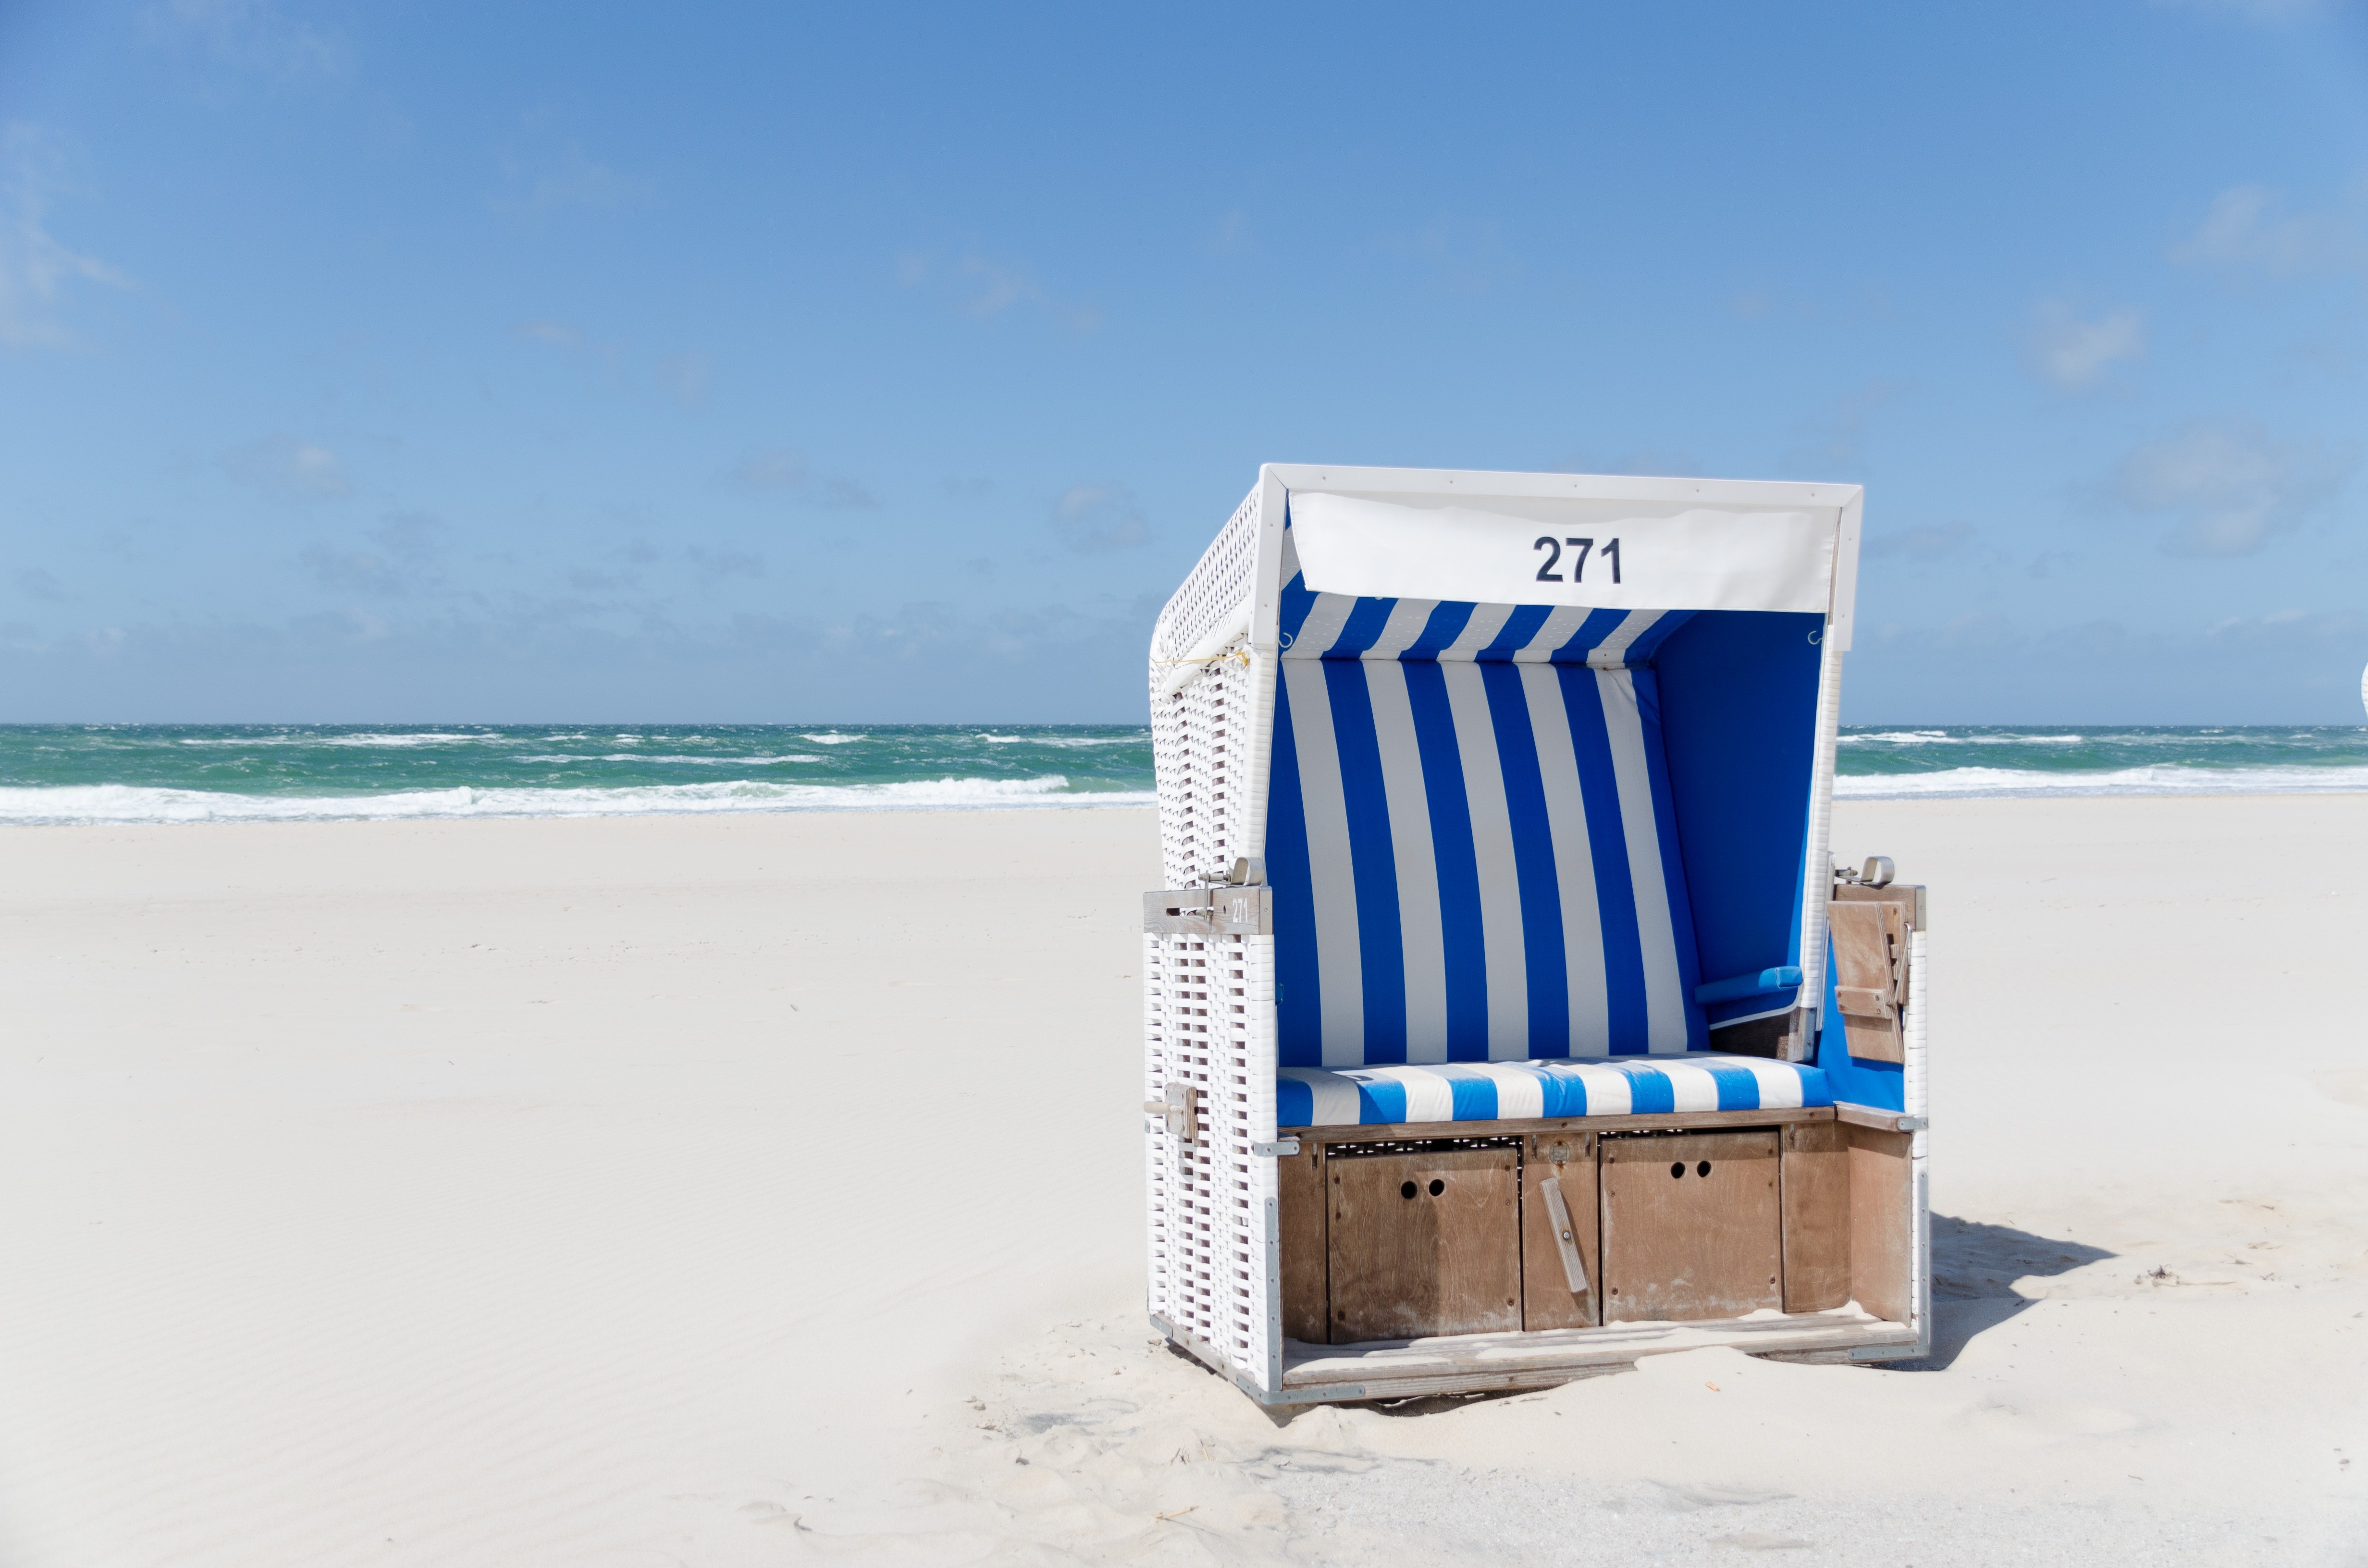 White and blue stripe booth number 271 on seashore during daytime photo